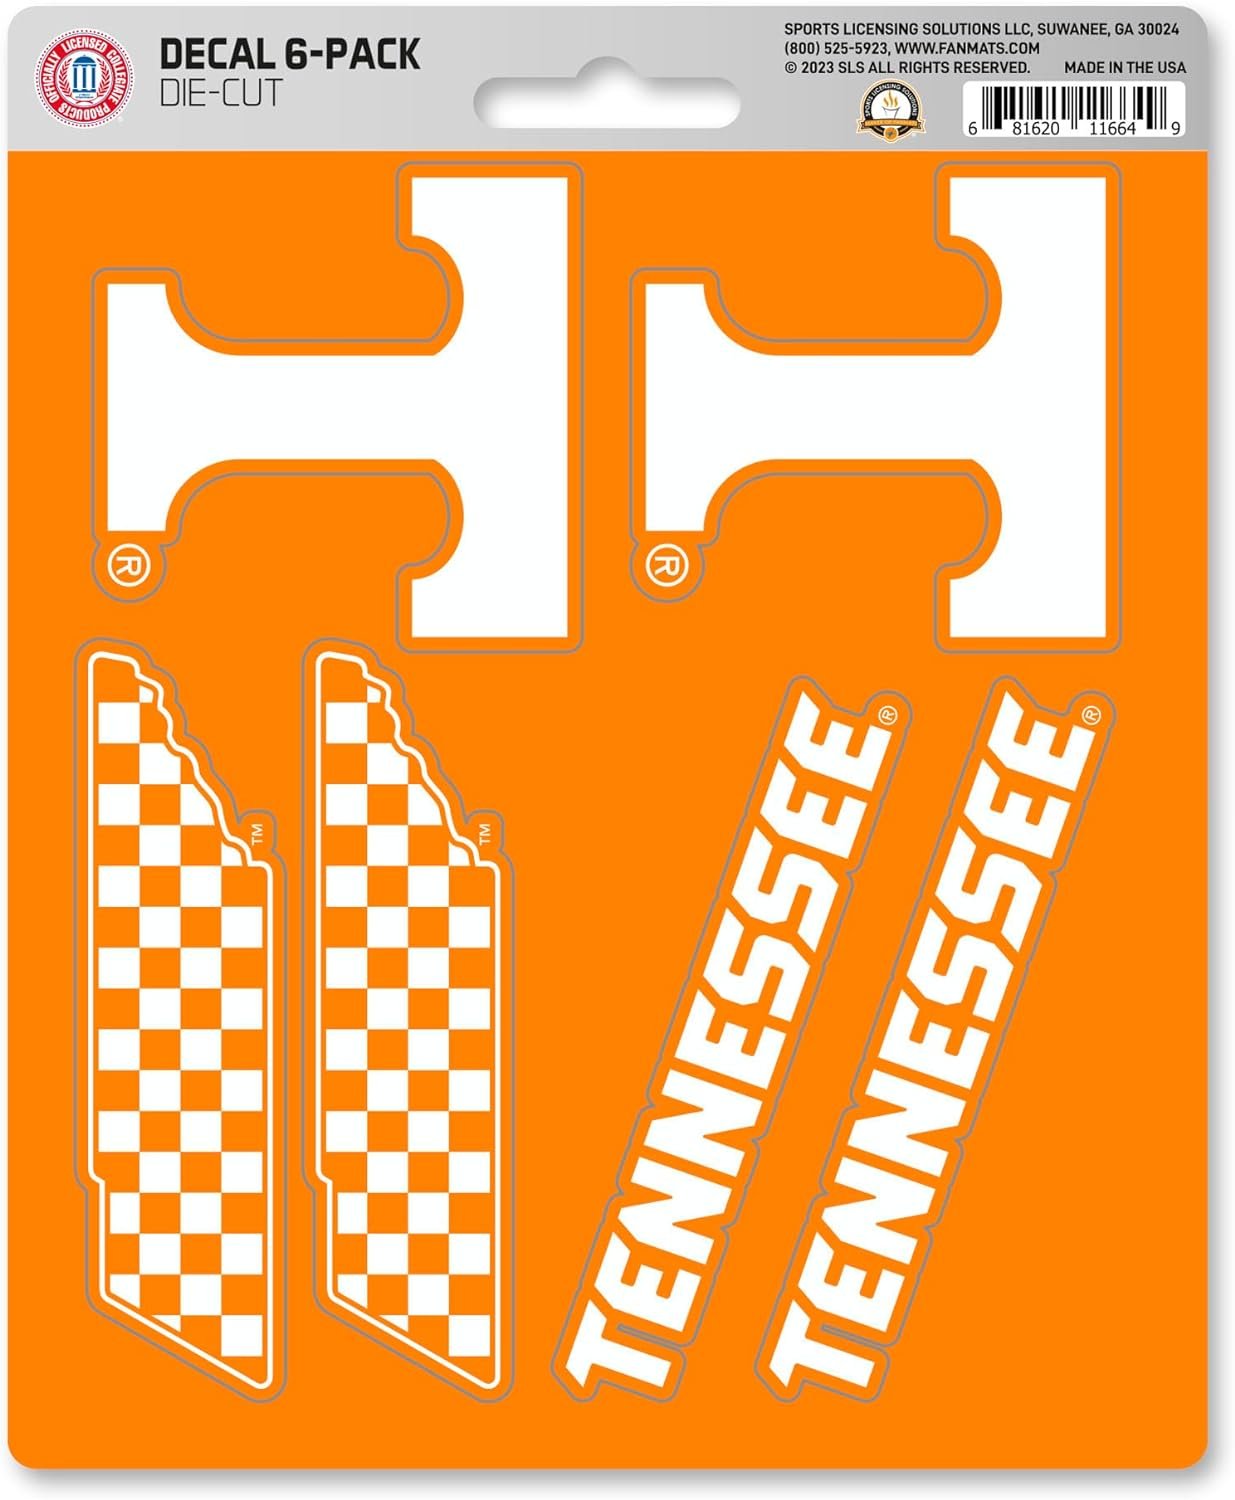 University of Tennessee Volunteers 6-Piece Decal Sticker Set, 5x6 Inch Sheet, Gift for football fans for any hard surfaces around home, automotive, personal items